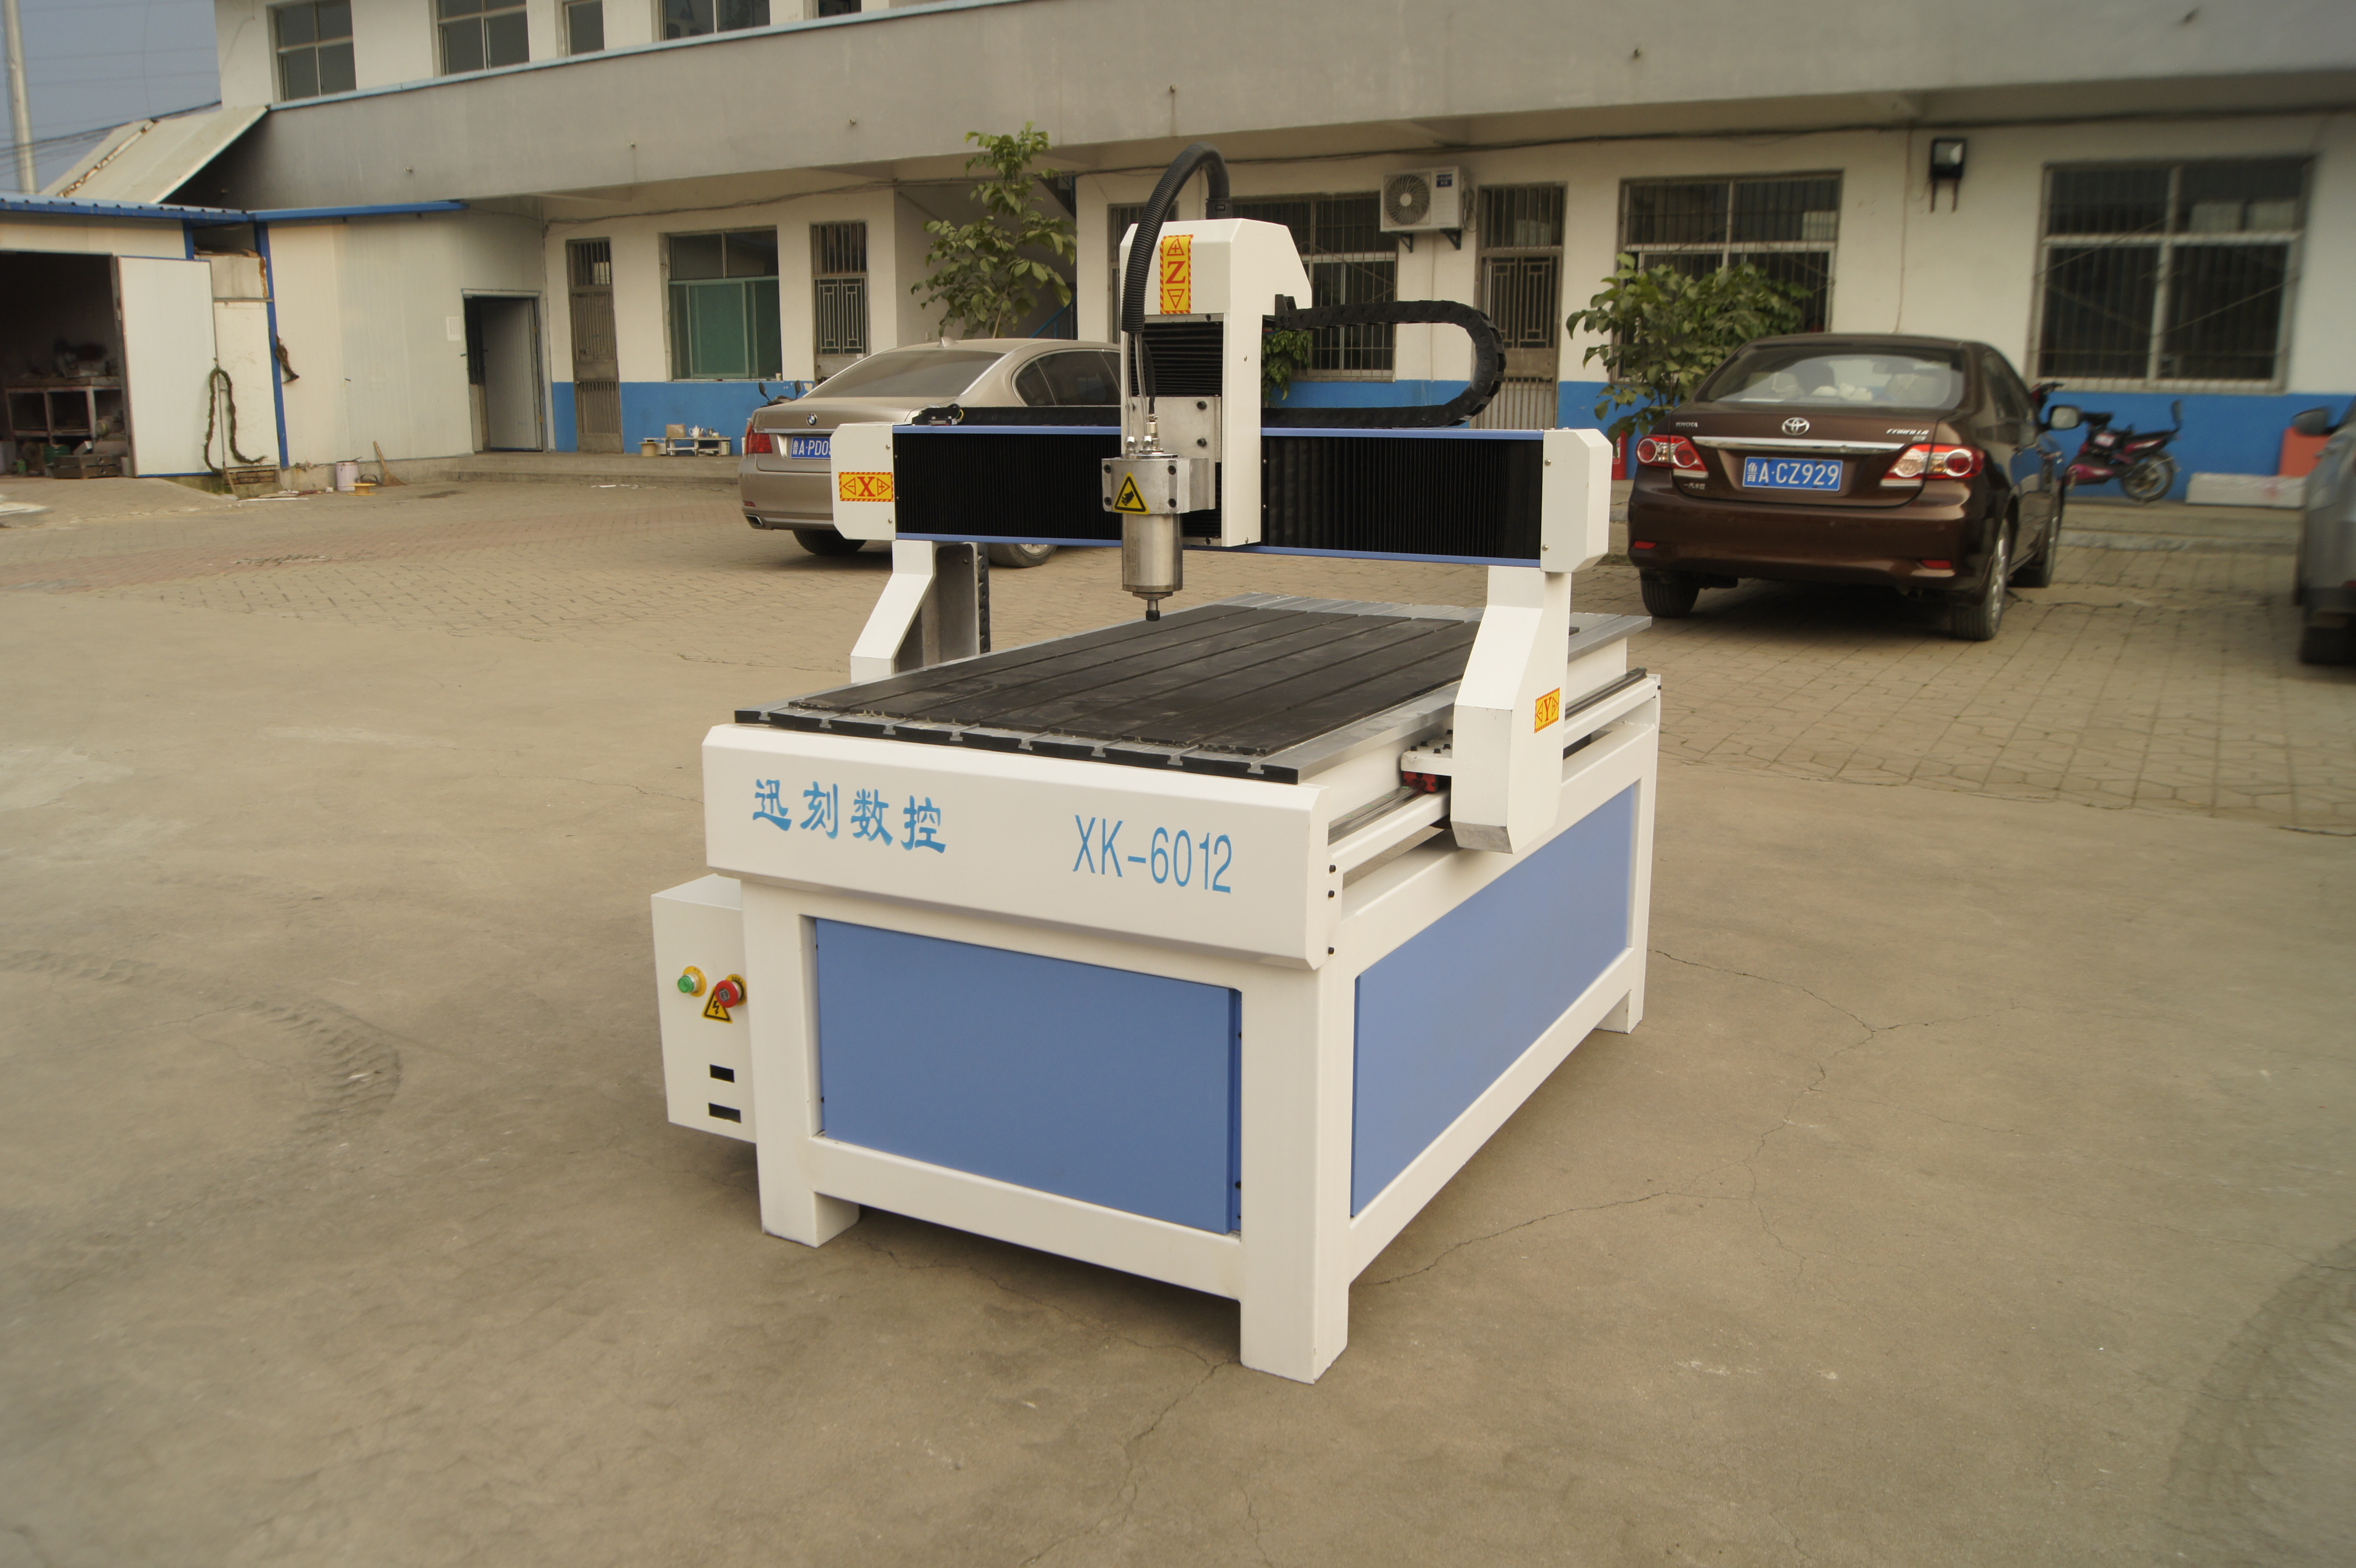 XK-6090 Small Size Cnc Router